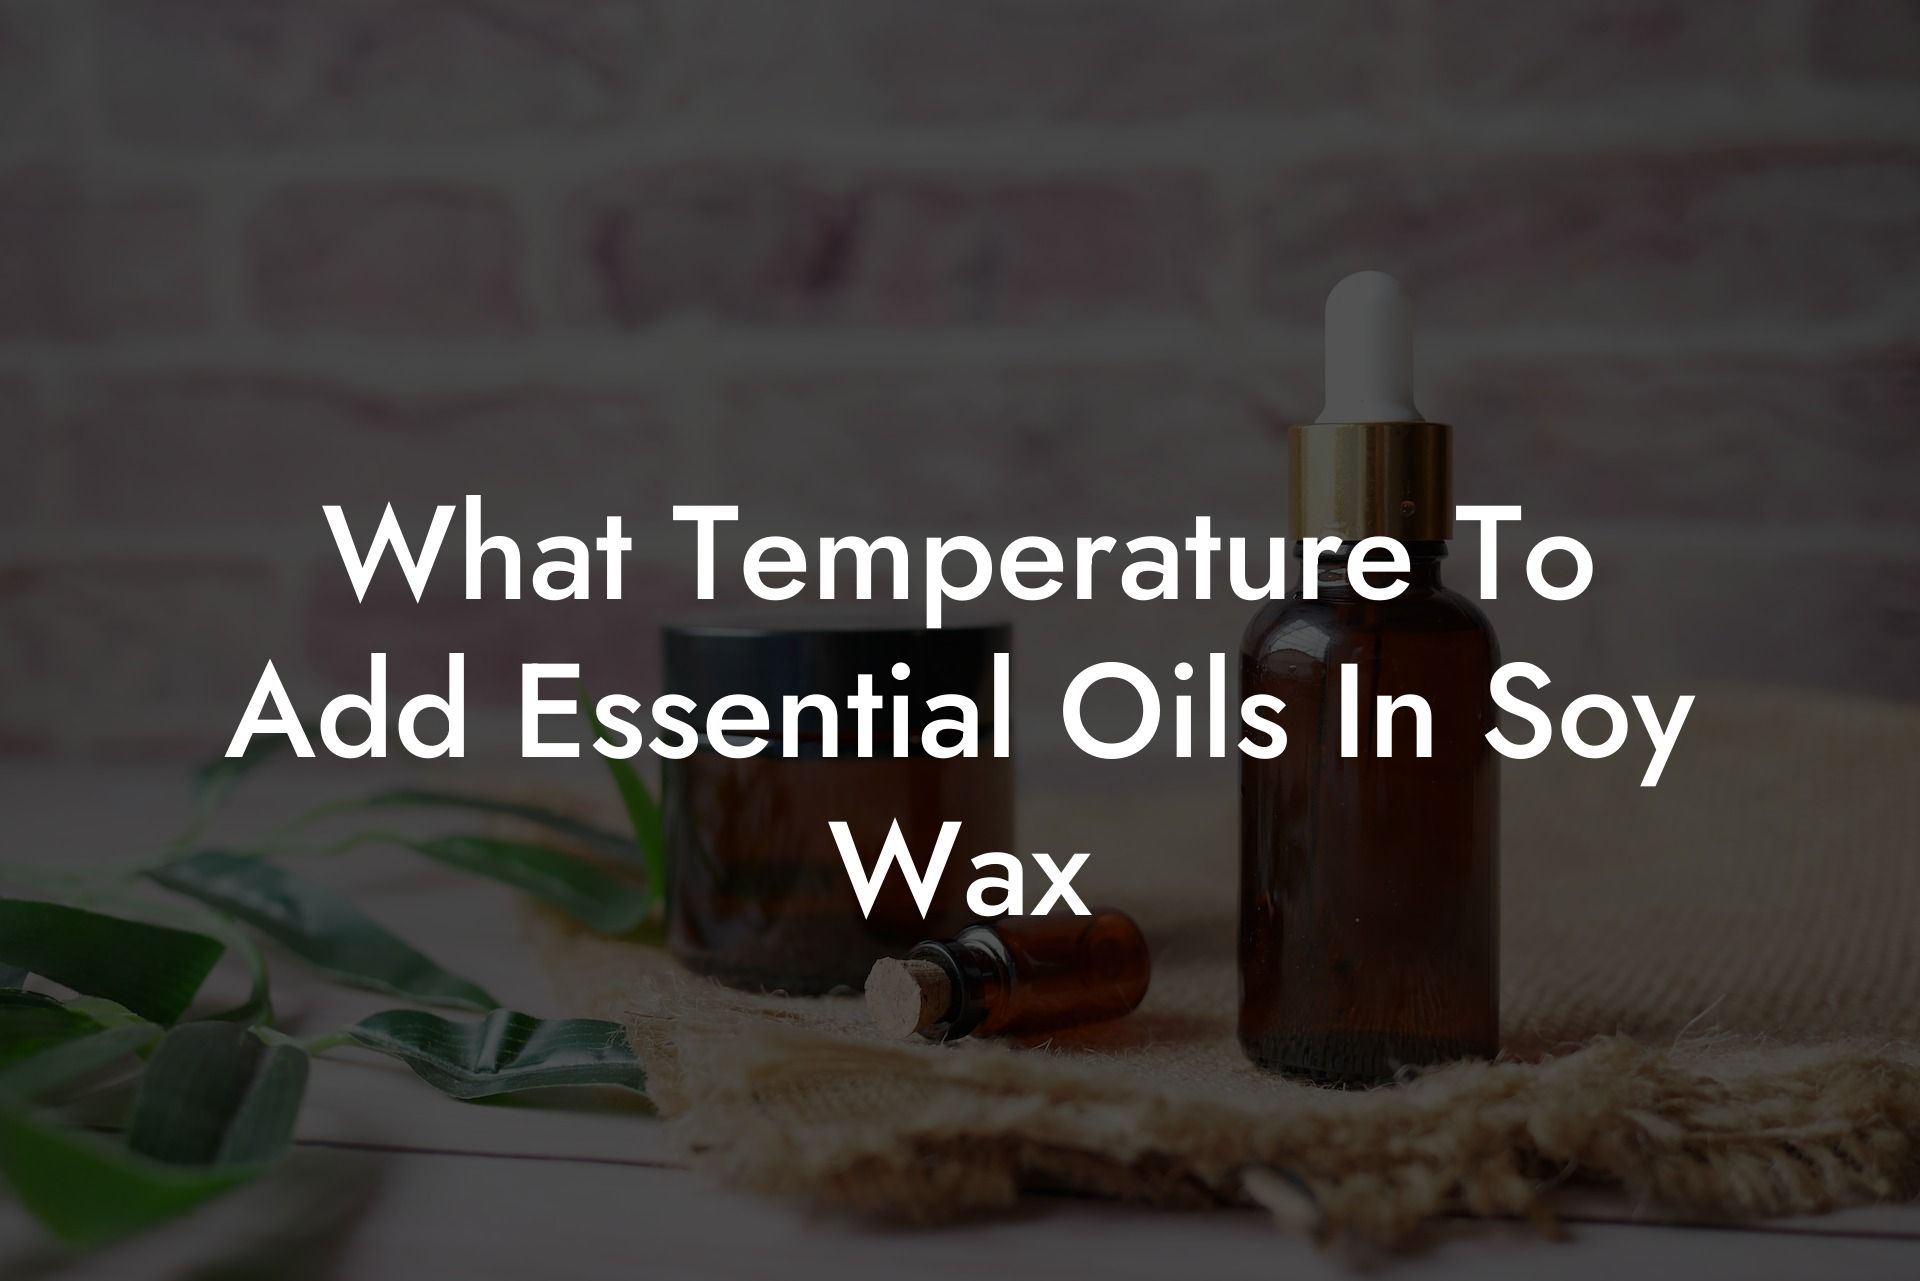 What Temperature To Add Essential Oils In Soy Wax